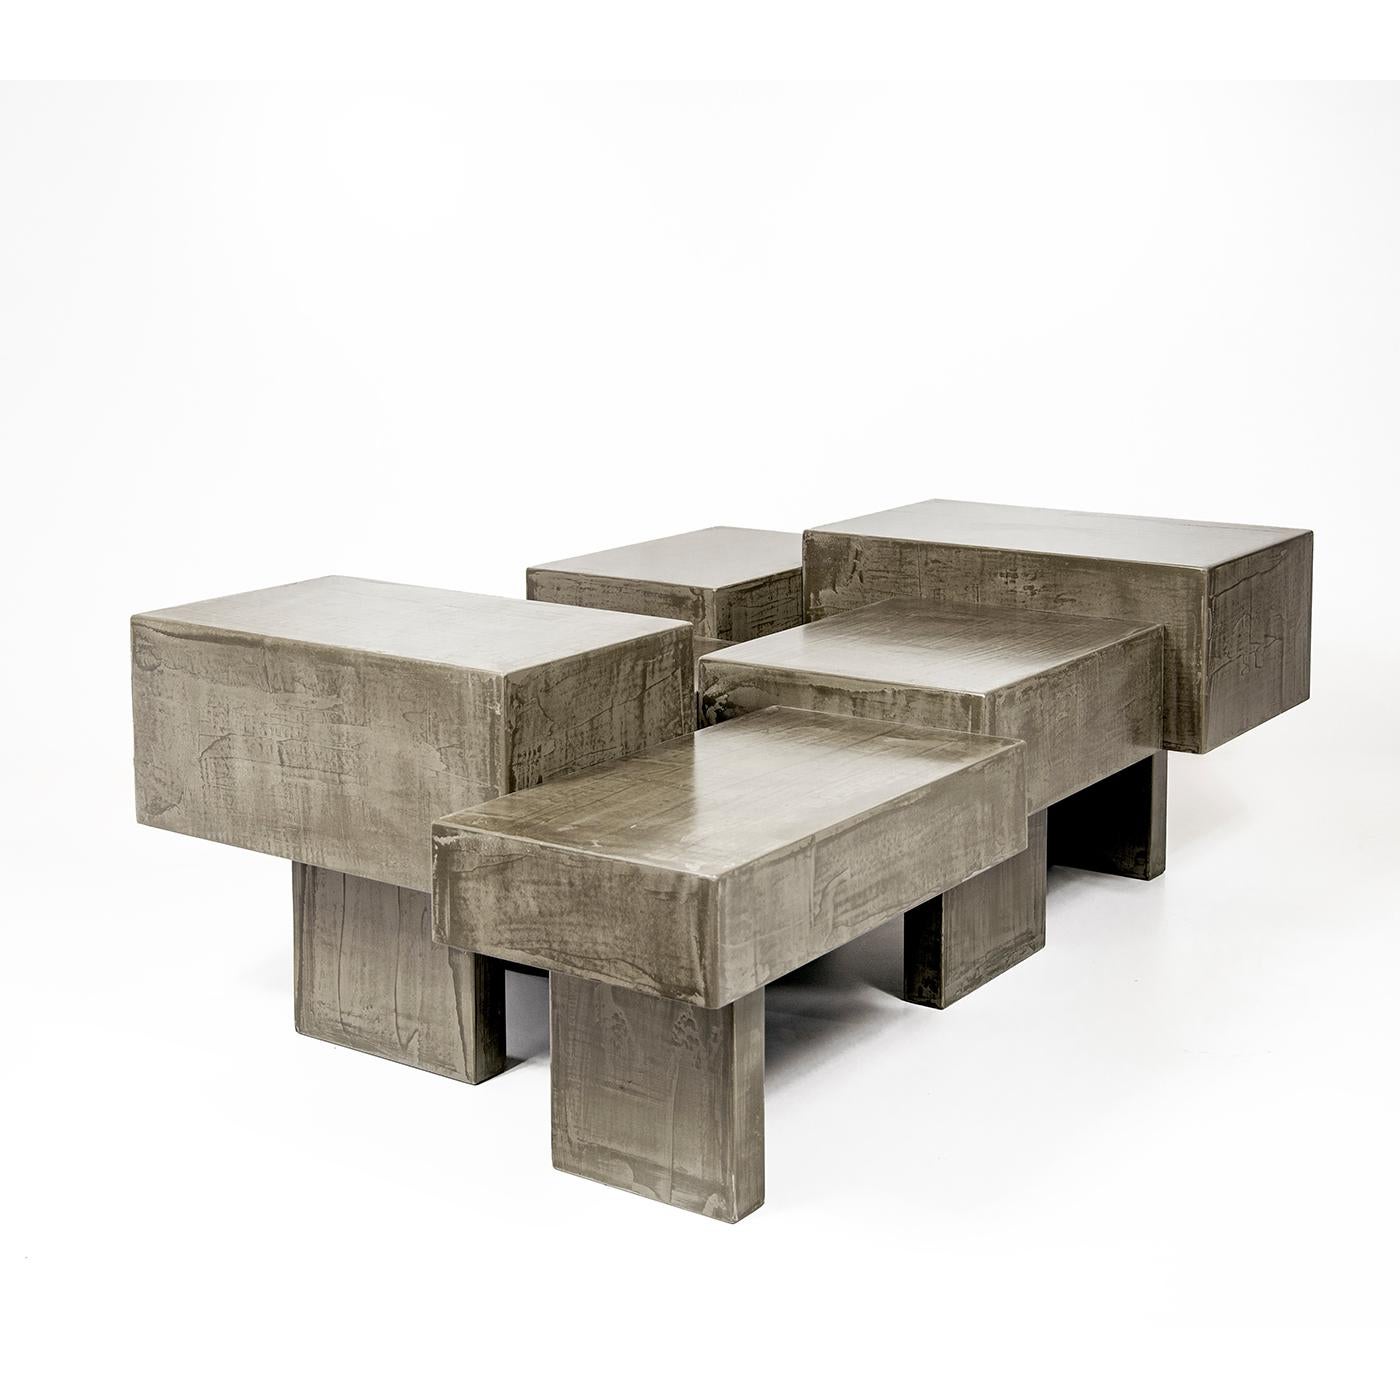 Inspired by the structural posts supporting a building above the ground, this coffee table is composed of individual sections of cement-covered wood set together in a scattered arrangement. The brushed light gray color and polished finish enhance